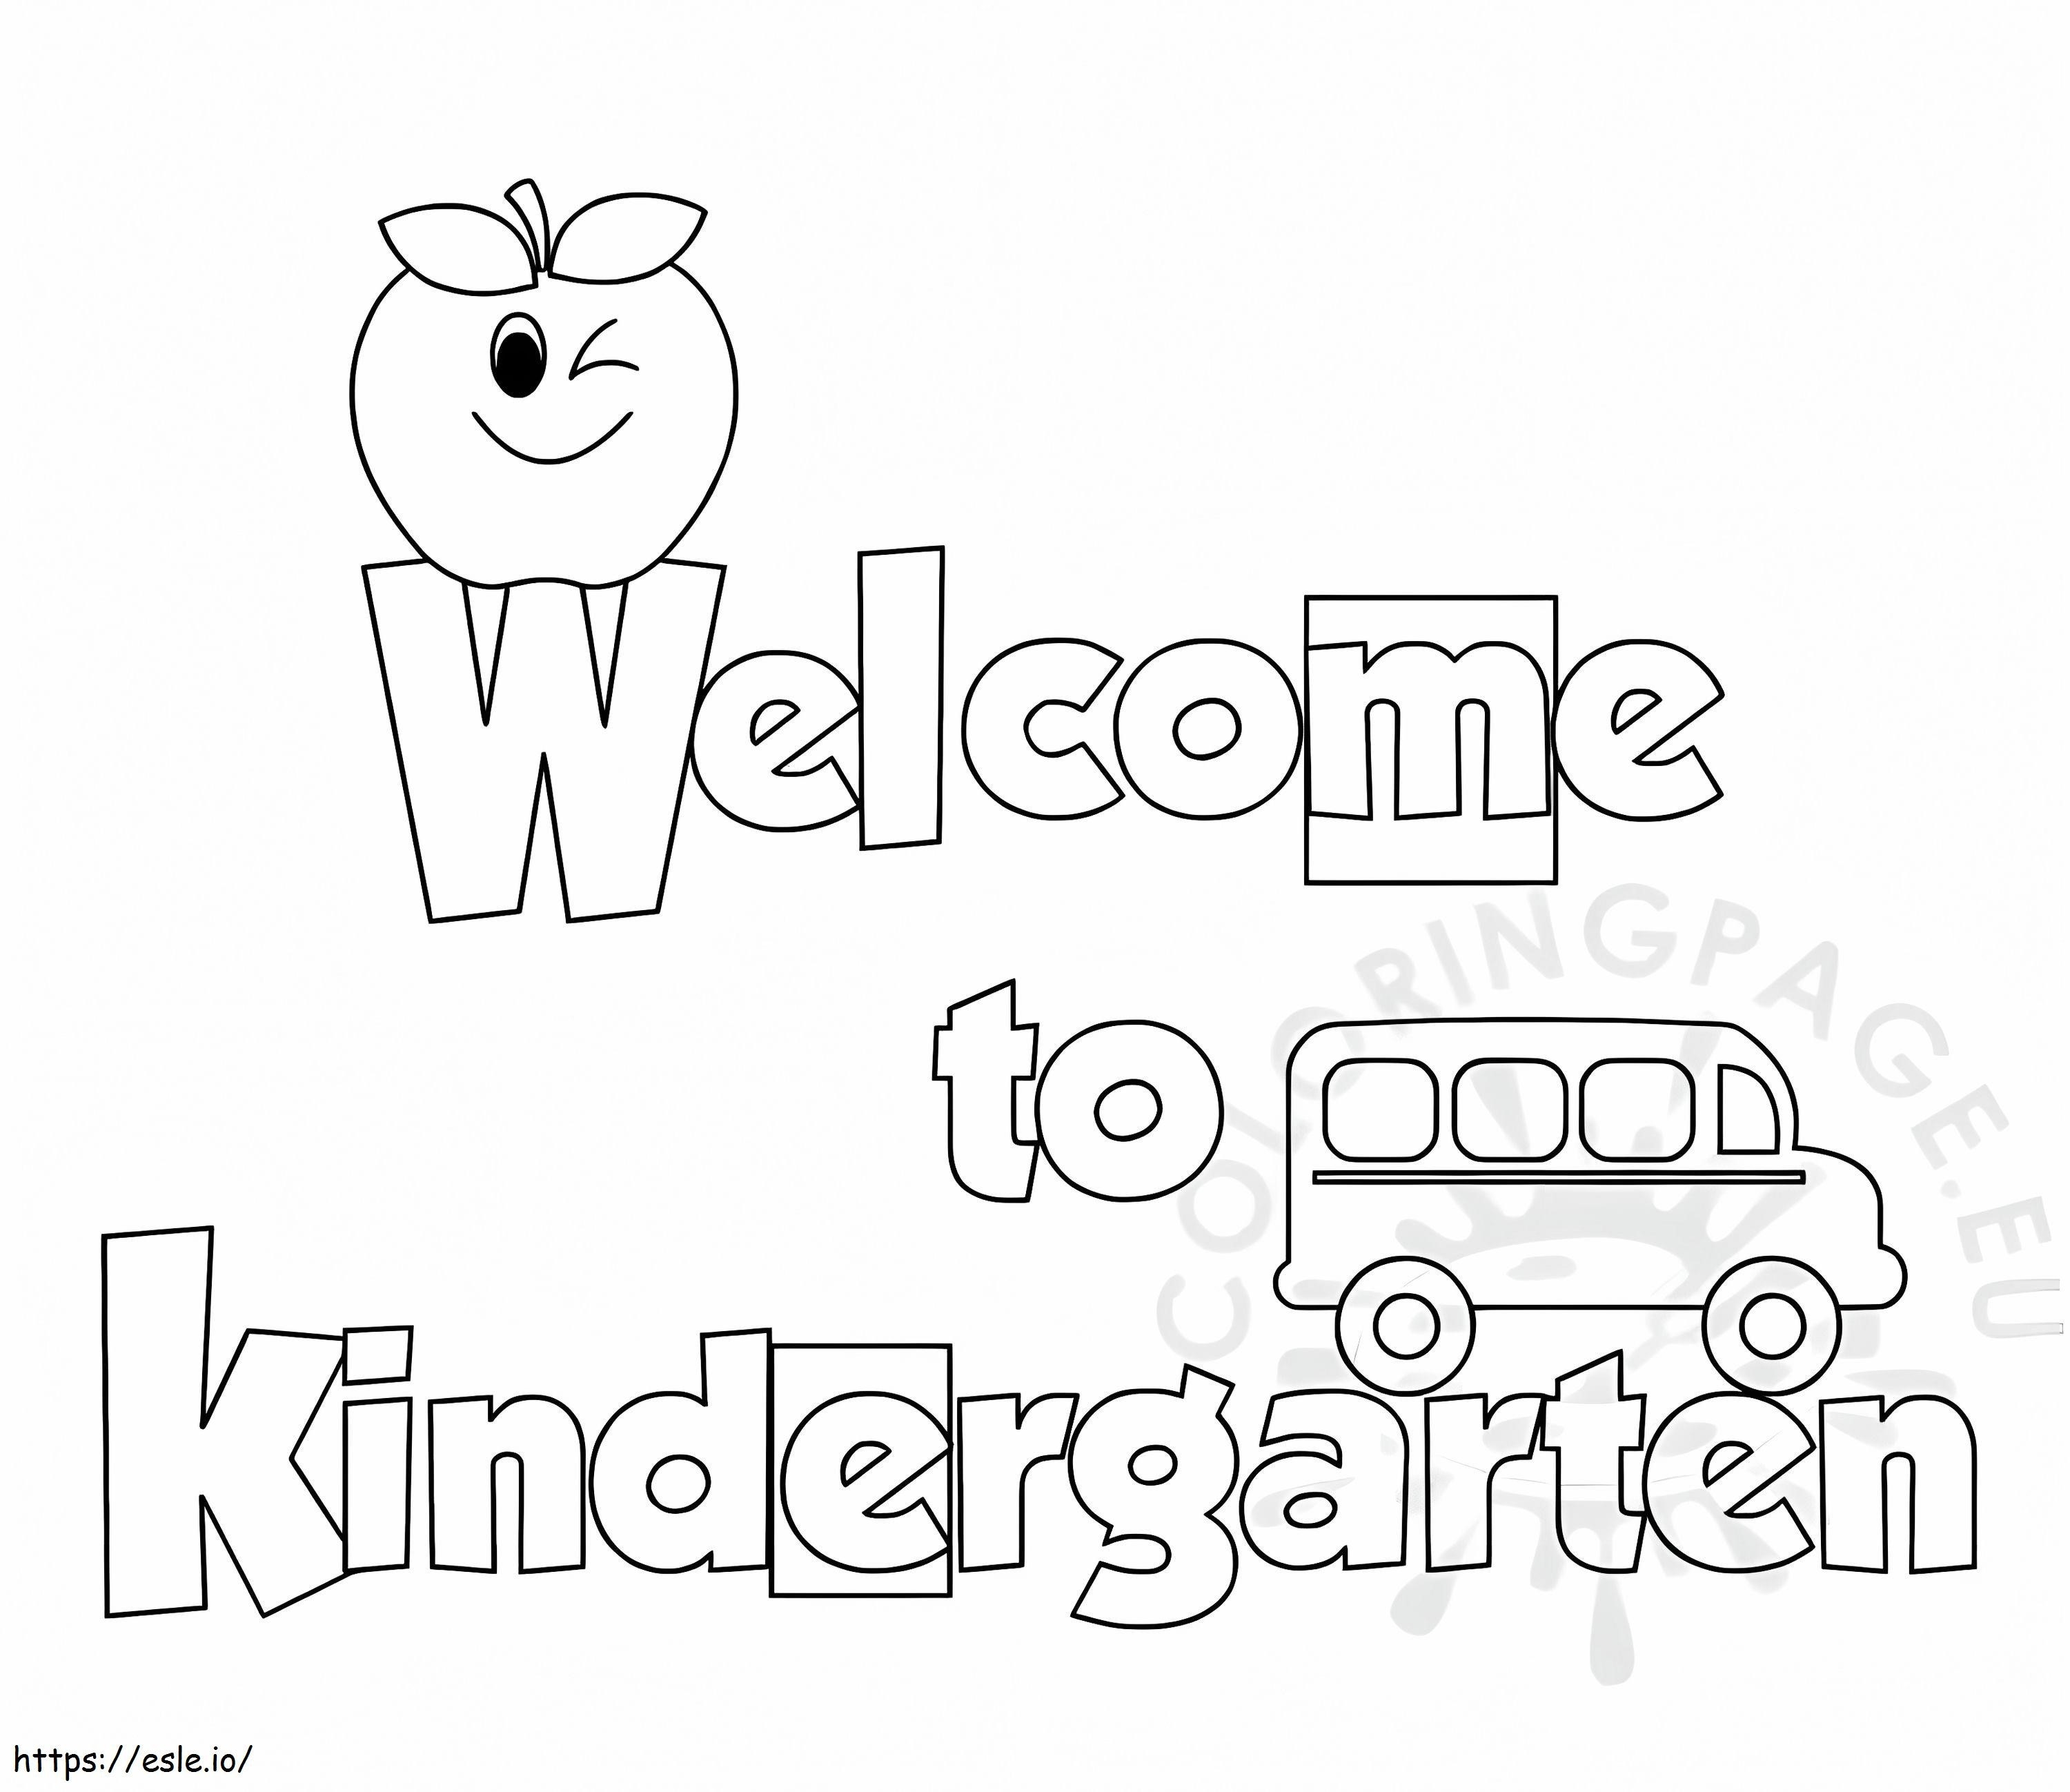 Welcome To Kindergarten 3 coloring page